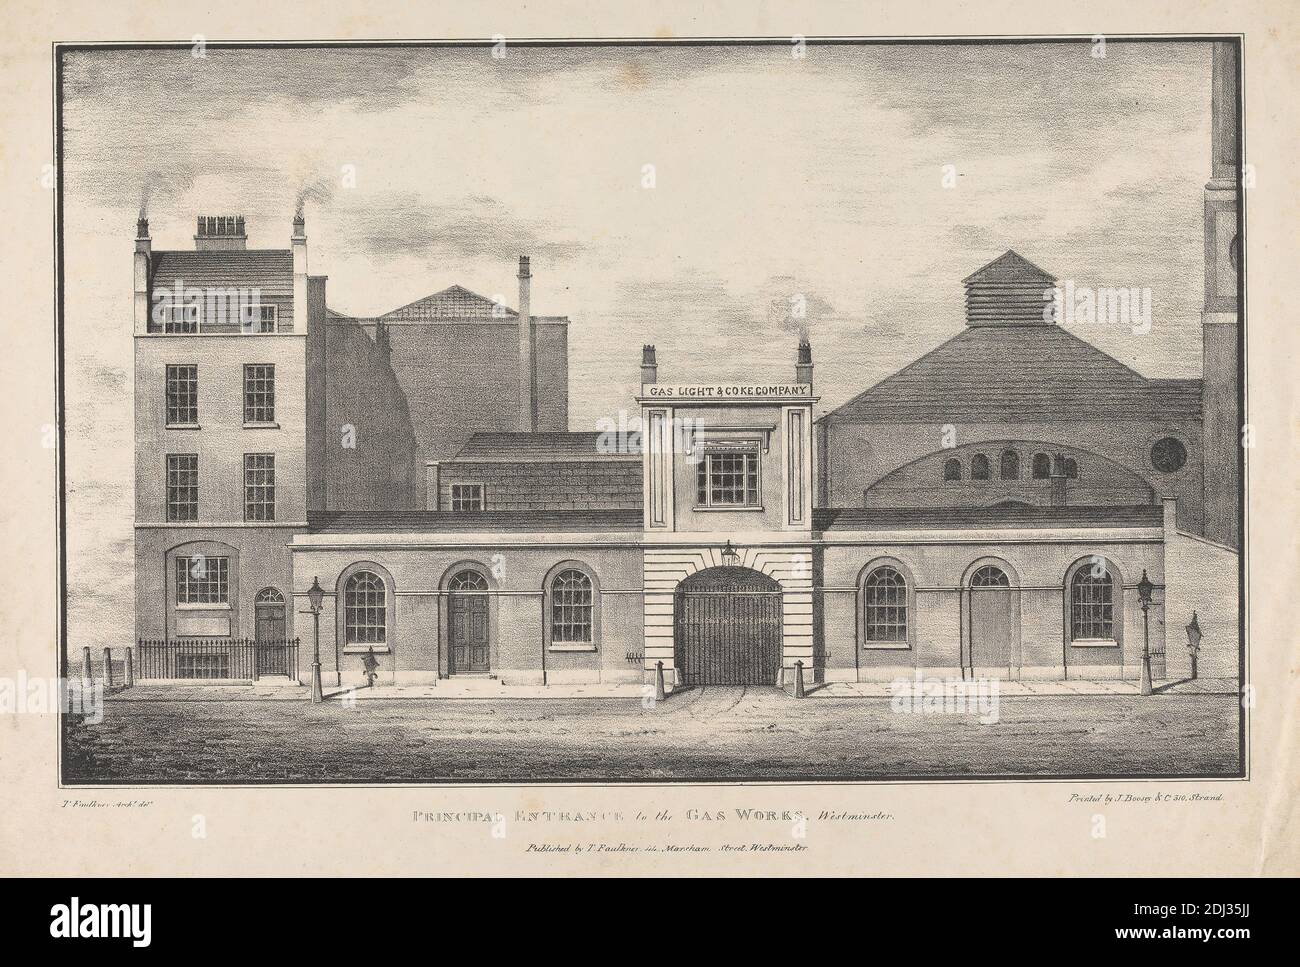 Principal Entrance to the Gas Works, Westminster, Print made by Thomas Faulkner, active 1825–1838, after Thomas Faulkner, active 1825–1838, Printed by J. Boosey & Co., 1823–1850, British, Published by Thomas Faulkner, active 1825–1838, ca. 1830, Lithograph on moderately thick, smooth, beige wove paper, Sheet: 13 7/8 x 19 inches (35.2 x 48.2 cm) and Image: 10 1/16 x 16 1/8 inches (25.5 x 41 cm), arches, architectural subject, building, chimneys, coal, company, doors, energy, factory, fences, gas, gates, illumination, industry, lamps, light, sidewalks, smoke, steam, street, towers, windows Stock Photo